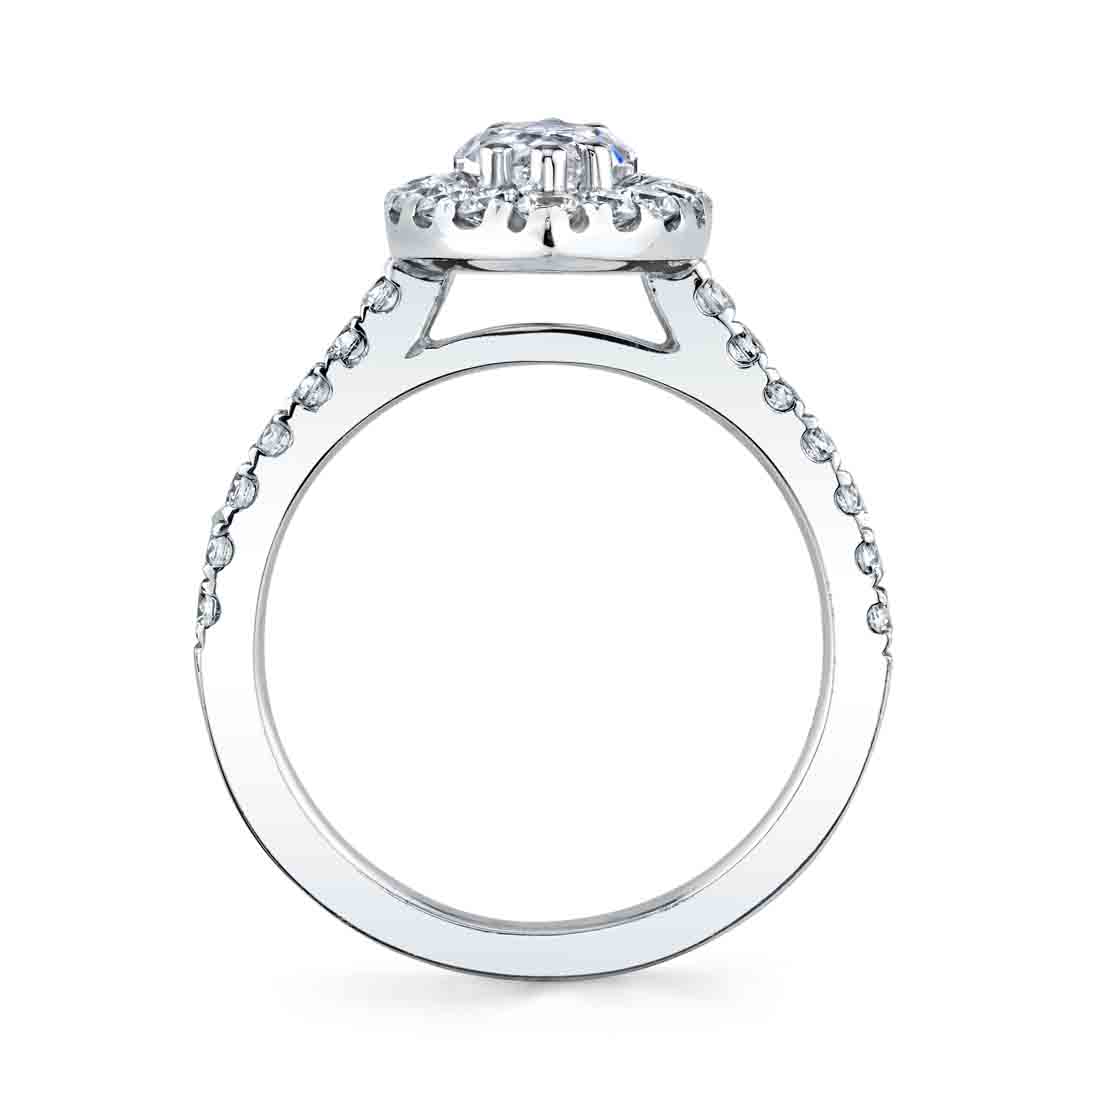 Profile Image of a Marquise Cut Engagement Ring with halo